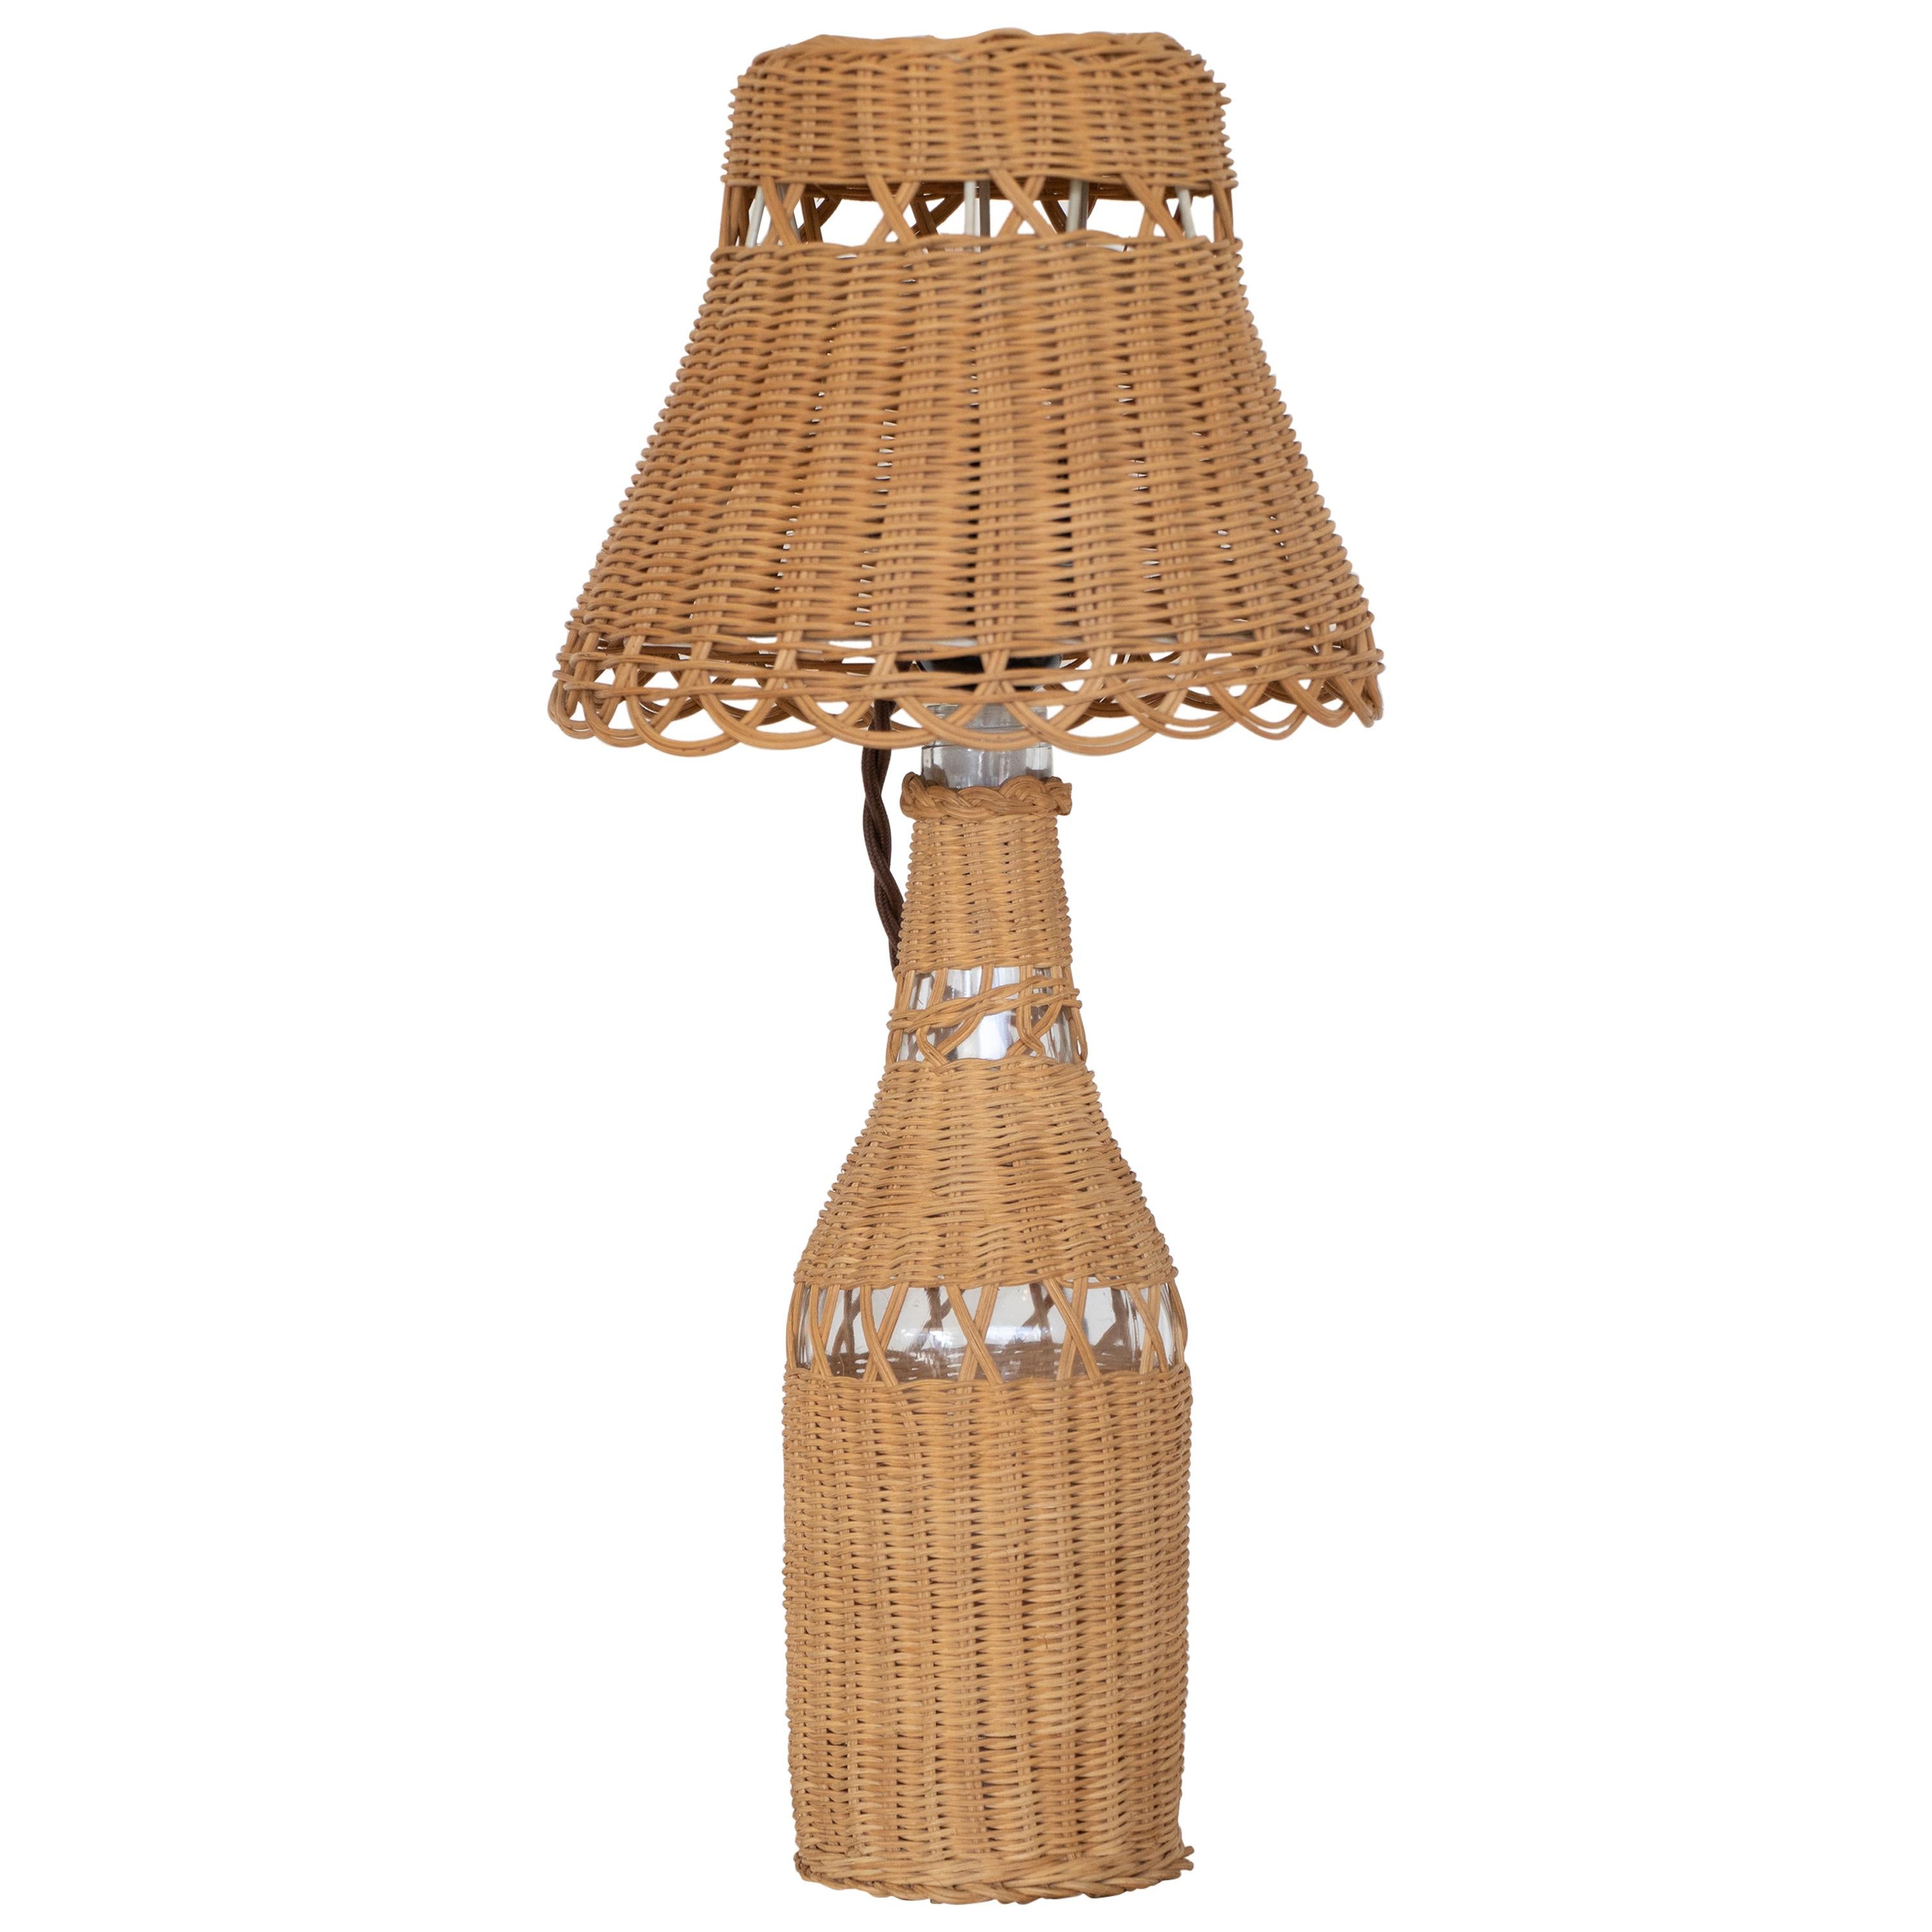 Petite French Wicker Table Lamp